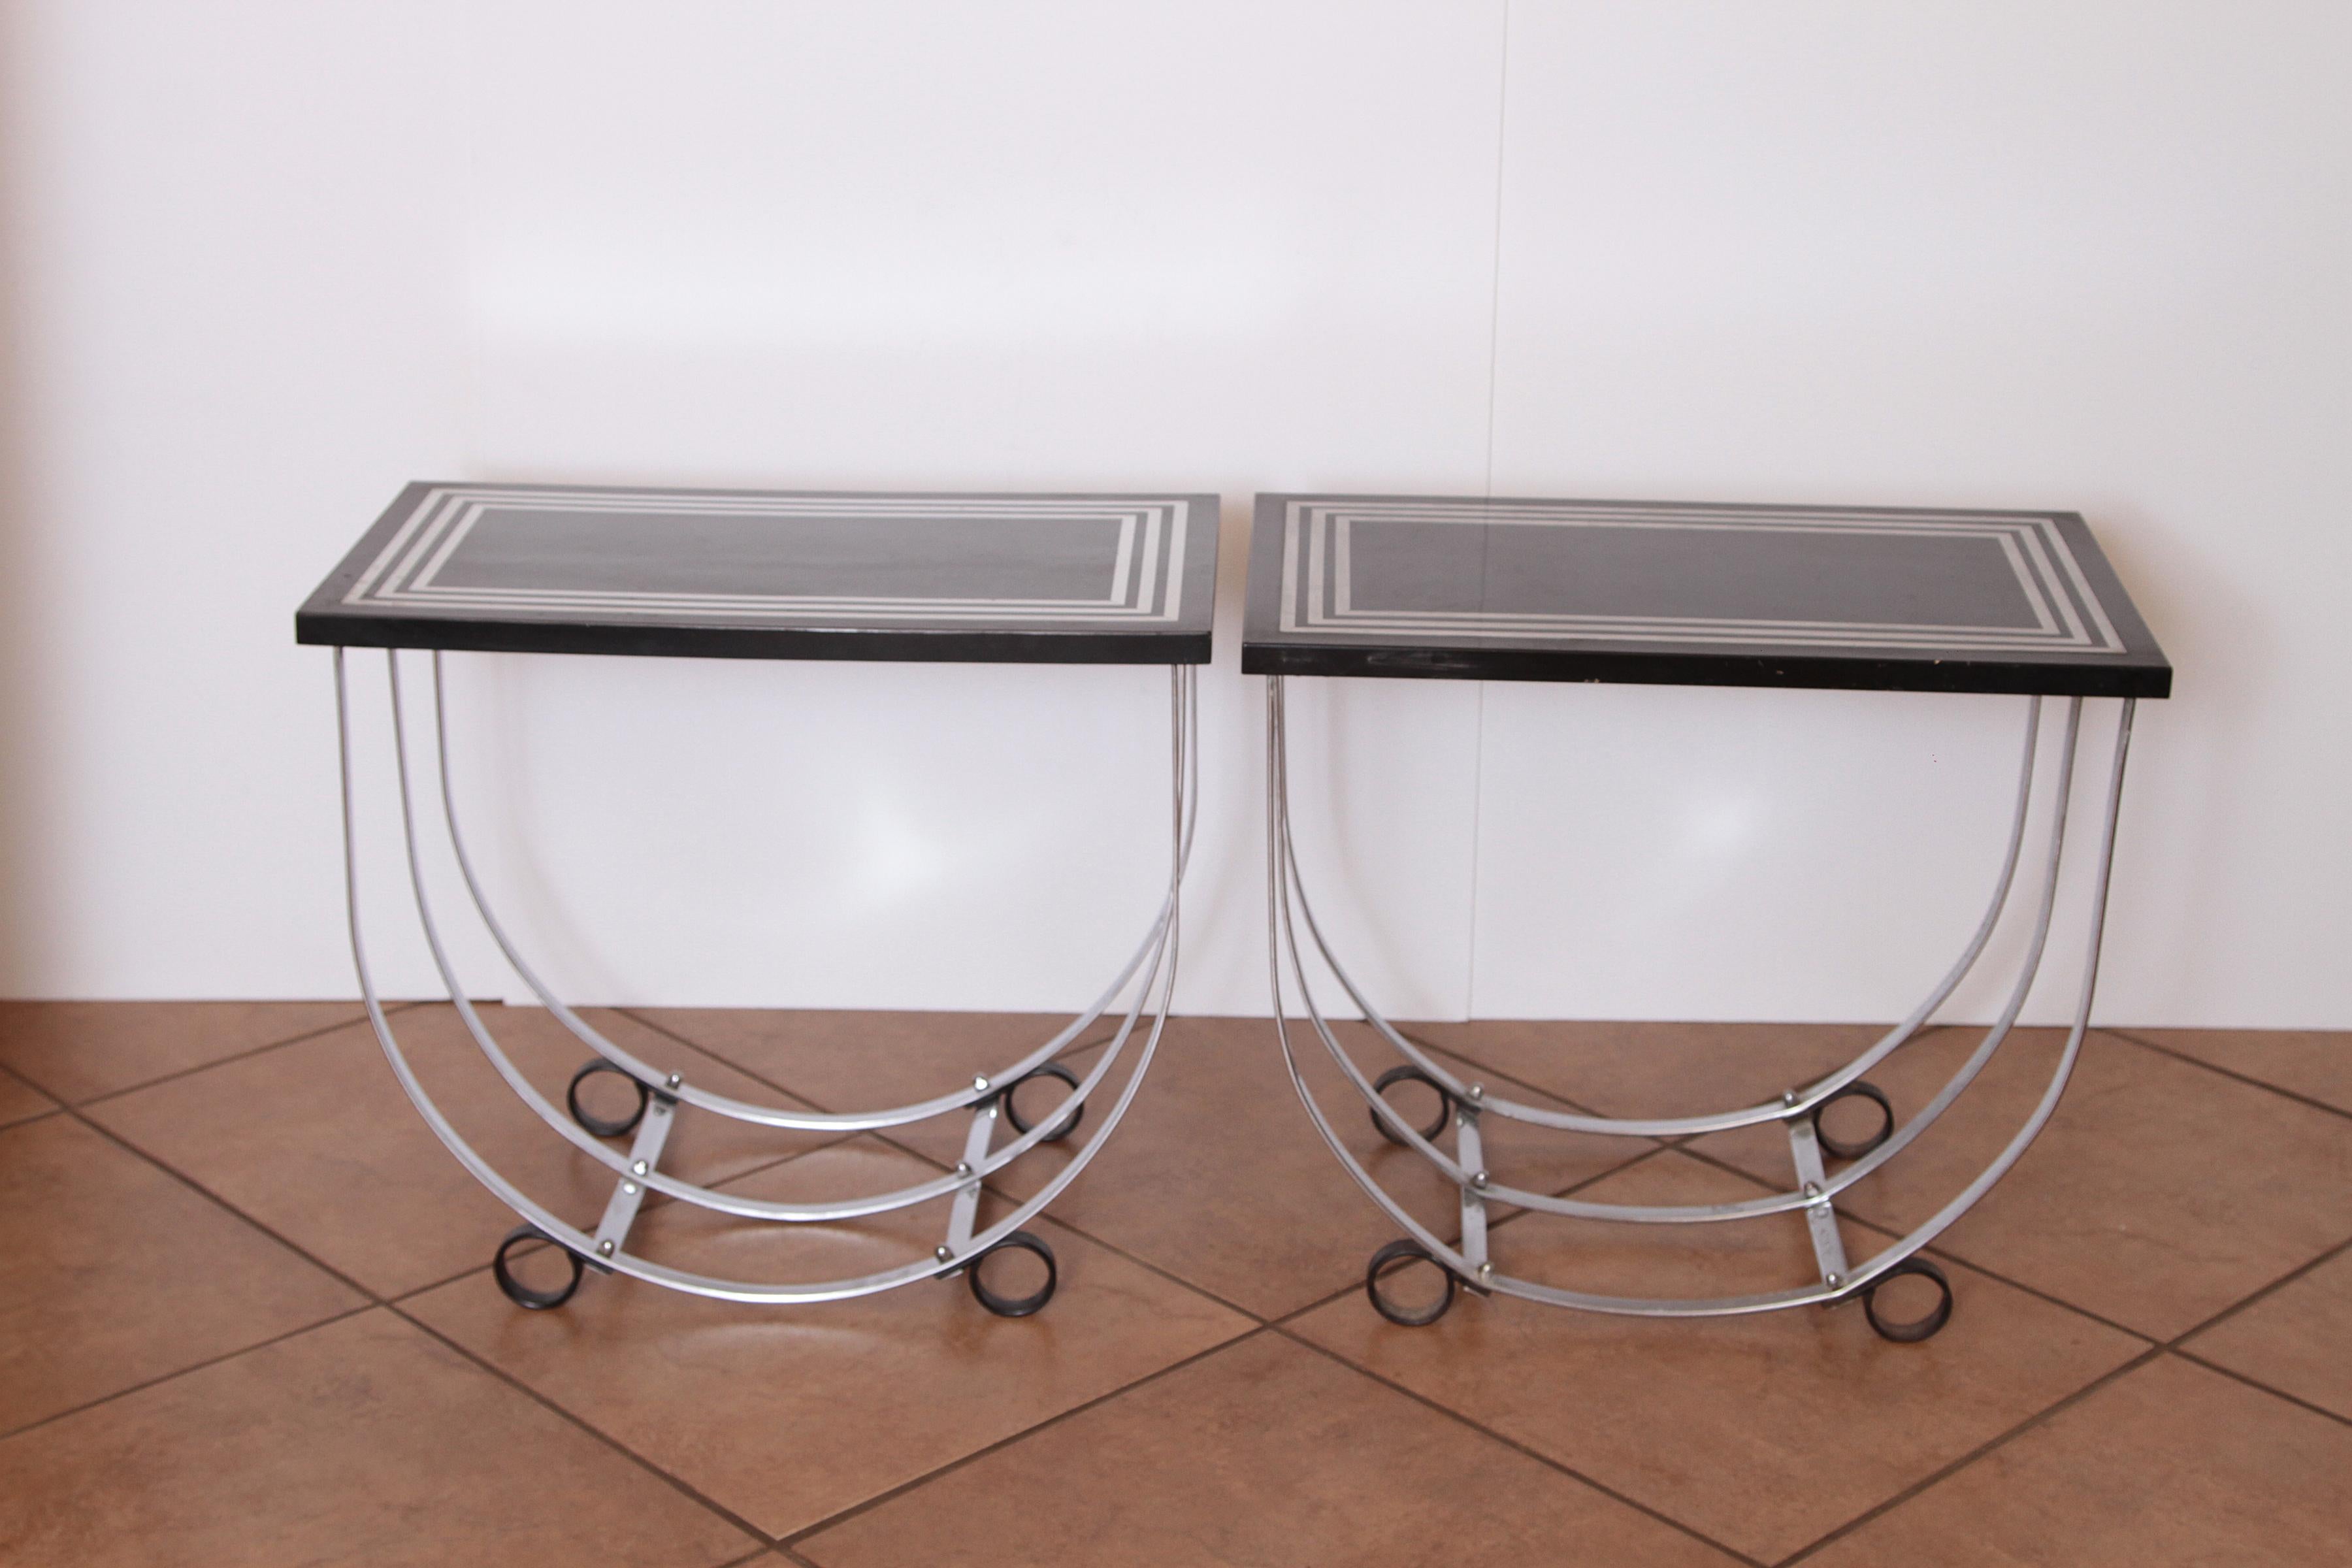 Machine Age Art Deco Pair McKay Inlaid Aluminum End Tables McKaycraft

Nice original unrestored condition pair end, side or occasional tables attributed to Salvatore Bevelacqua.
Normal wear throughout.  One table is very good condition, the other